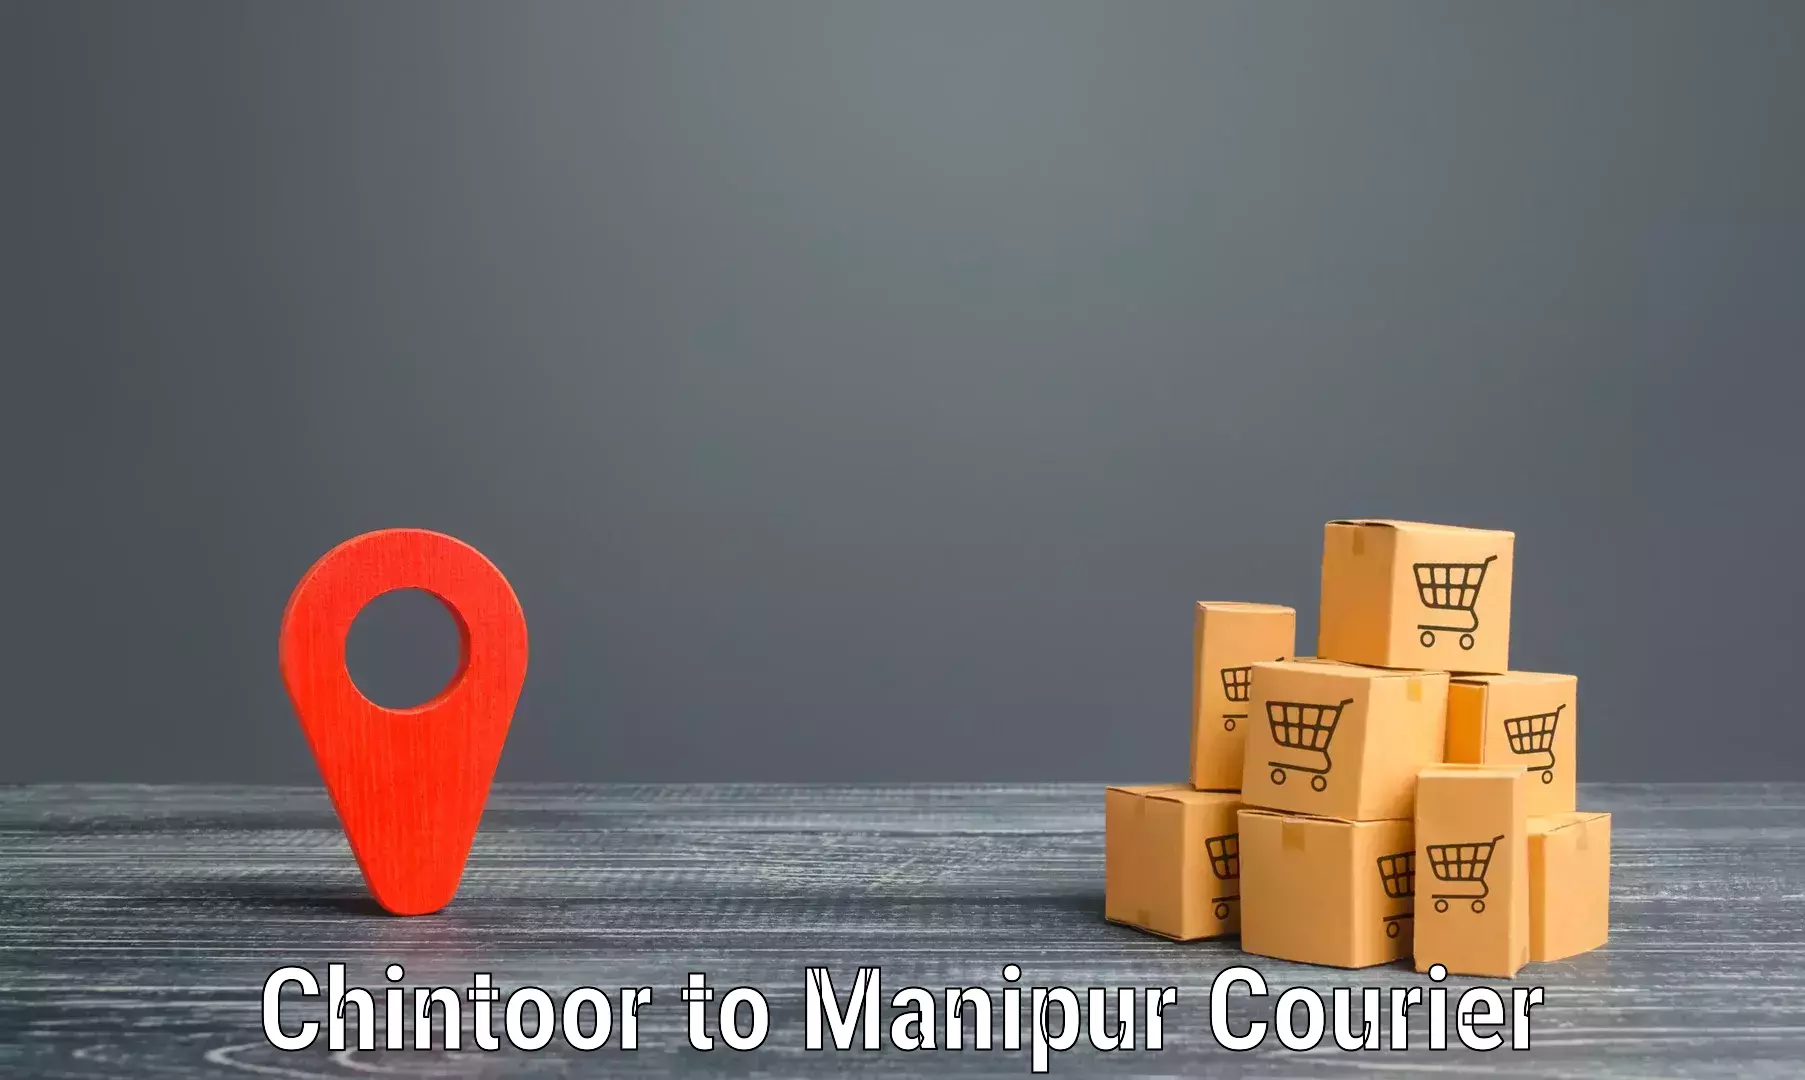 Courier service comparison Chintoor to Moirang